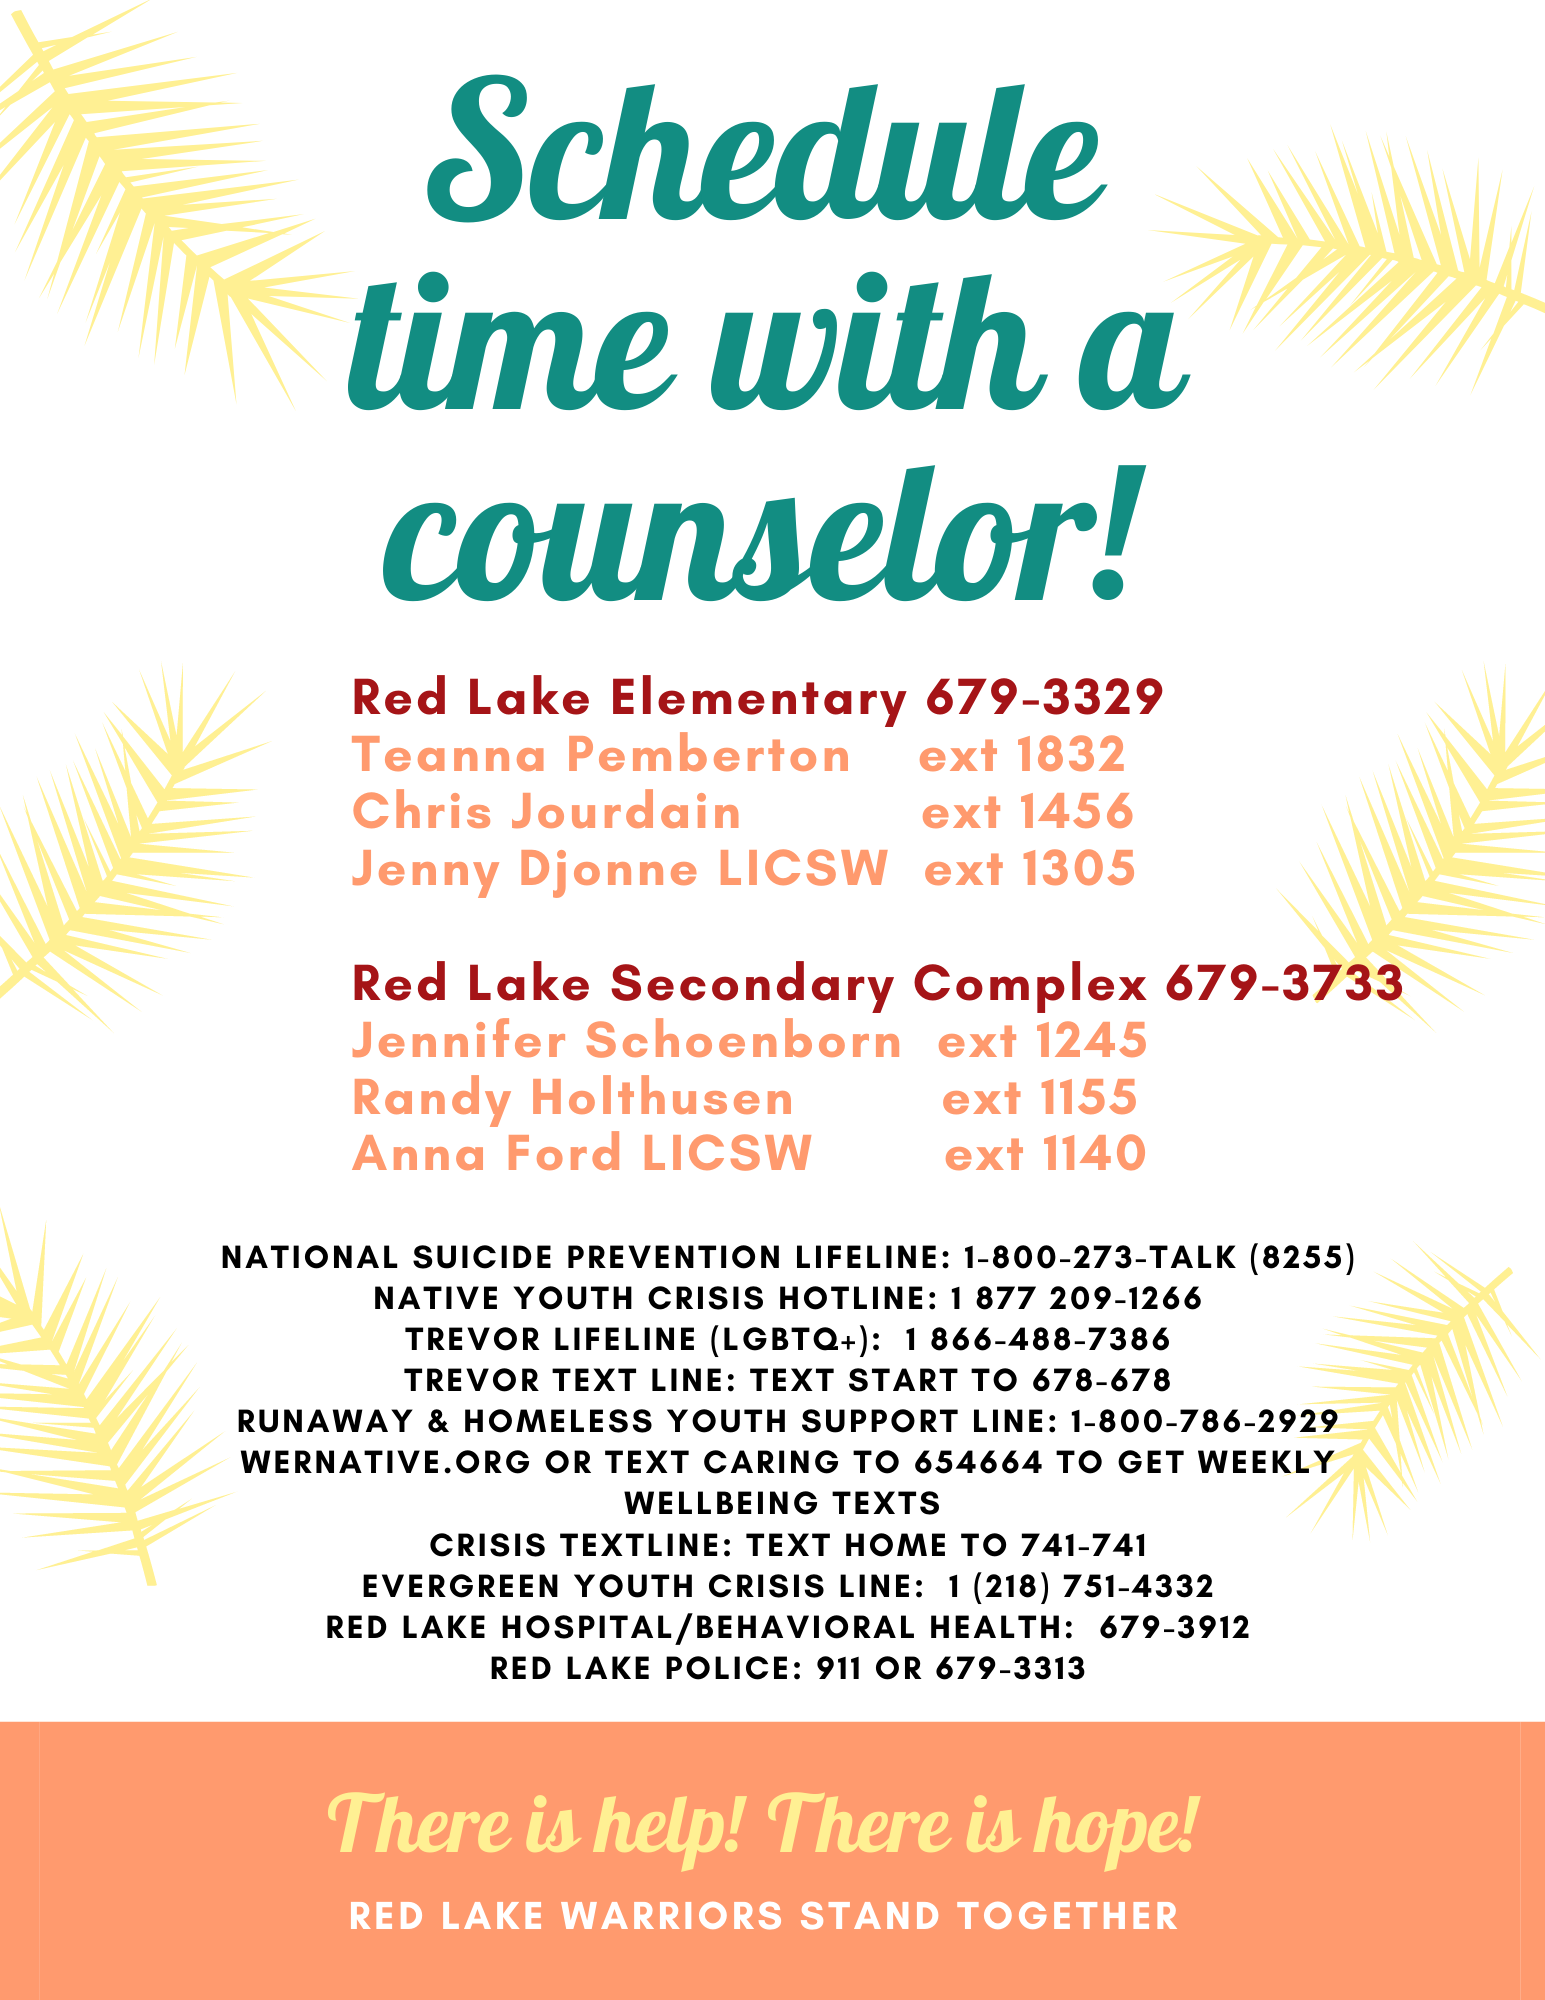 Schedule time with a counselor!